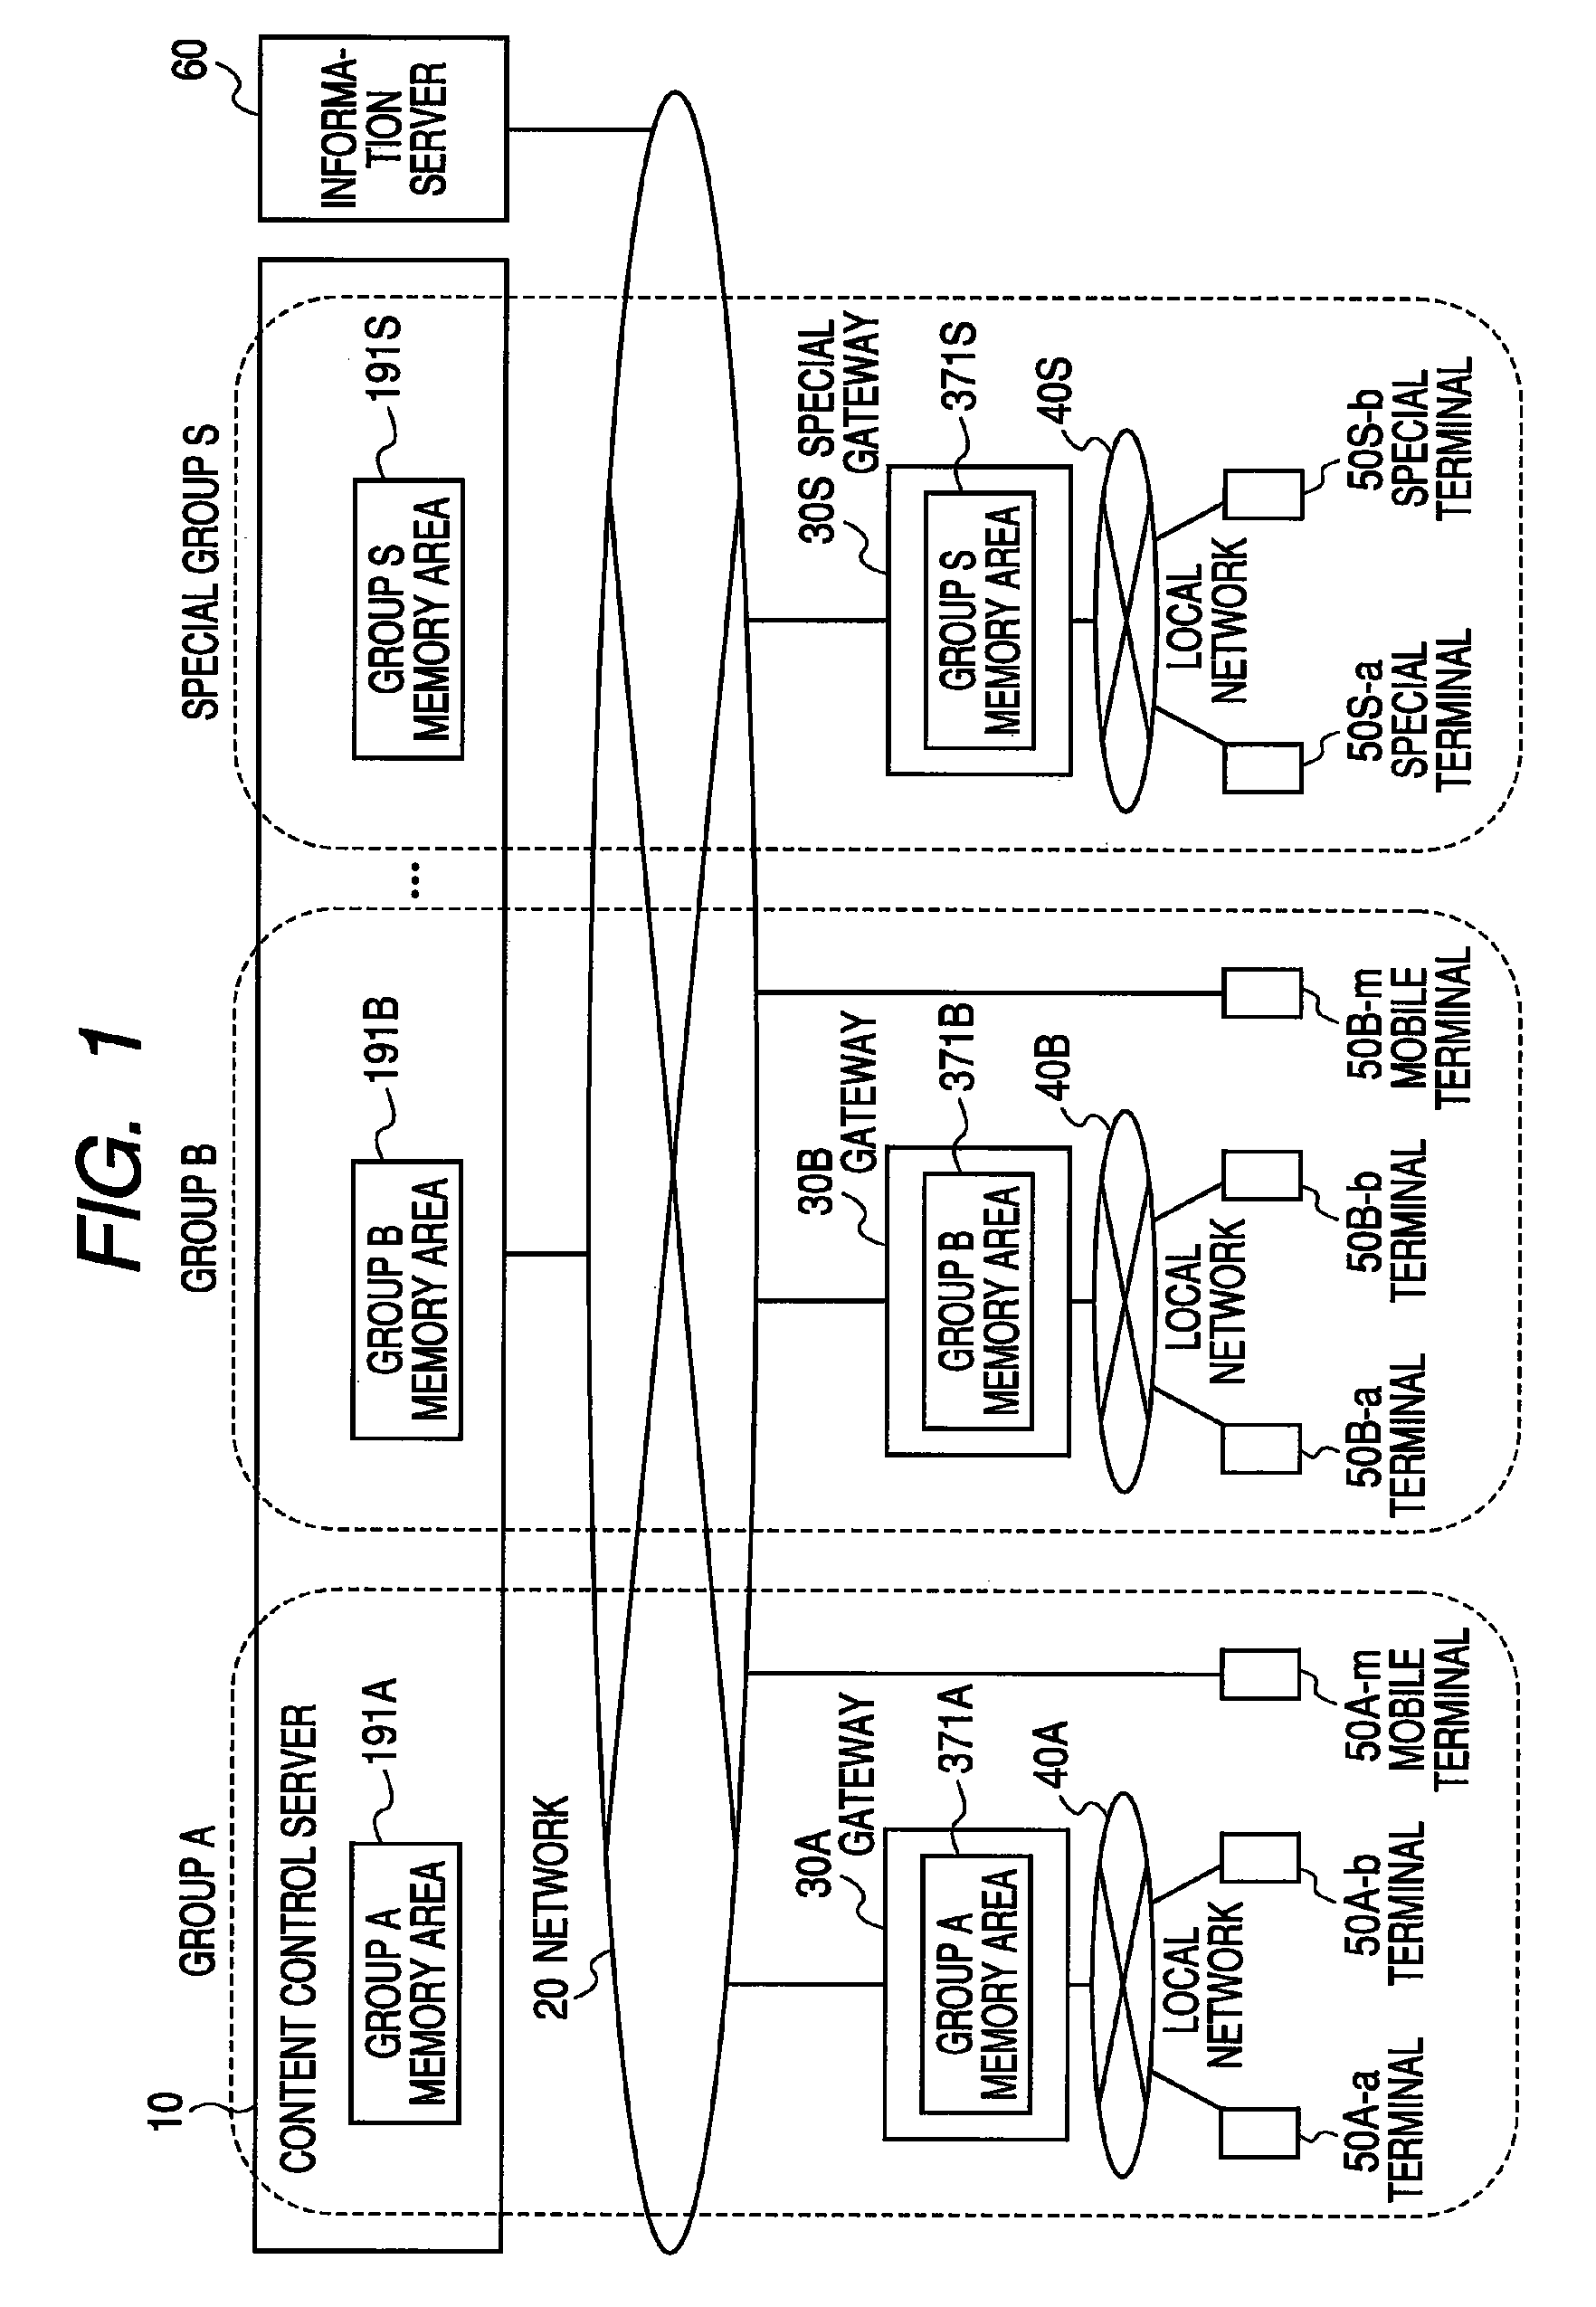 Content control system